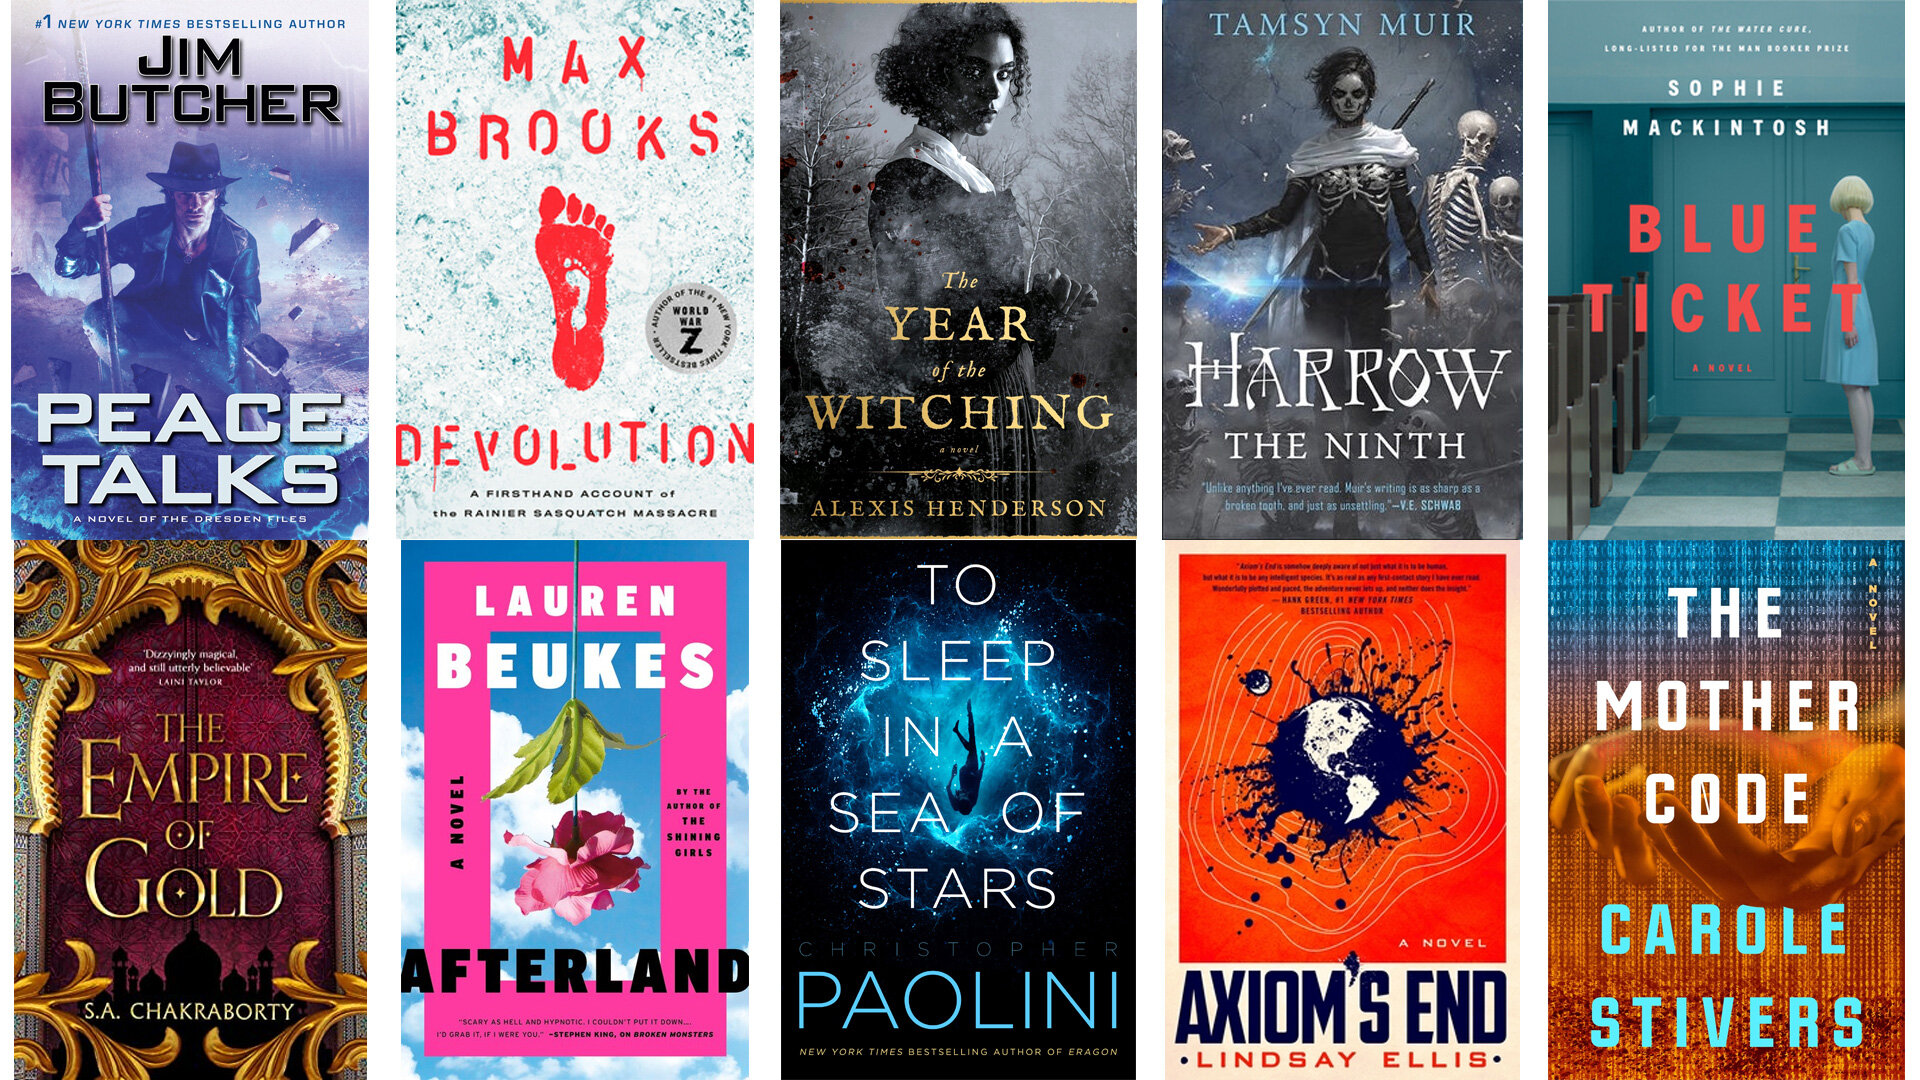 siv genvinde at tilbagetrække Here Are the Most Anticipated Sci-Fi and Fantasy Books of Summer 2020  According to Goodreads — GeekTyrant